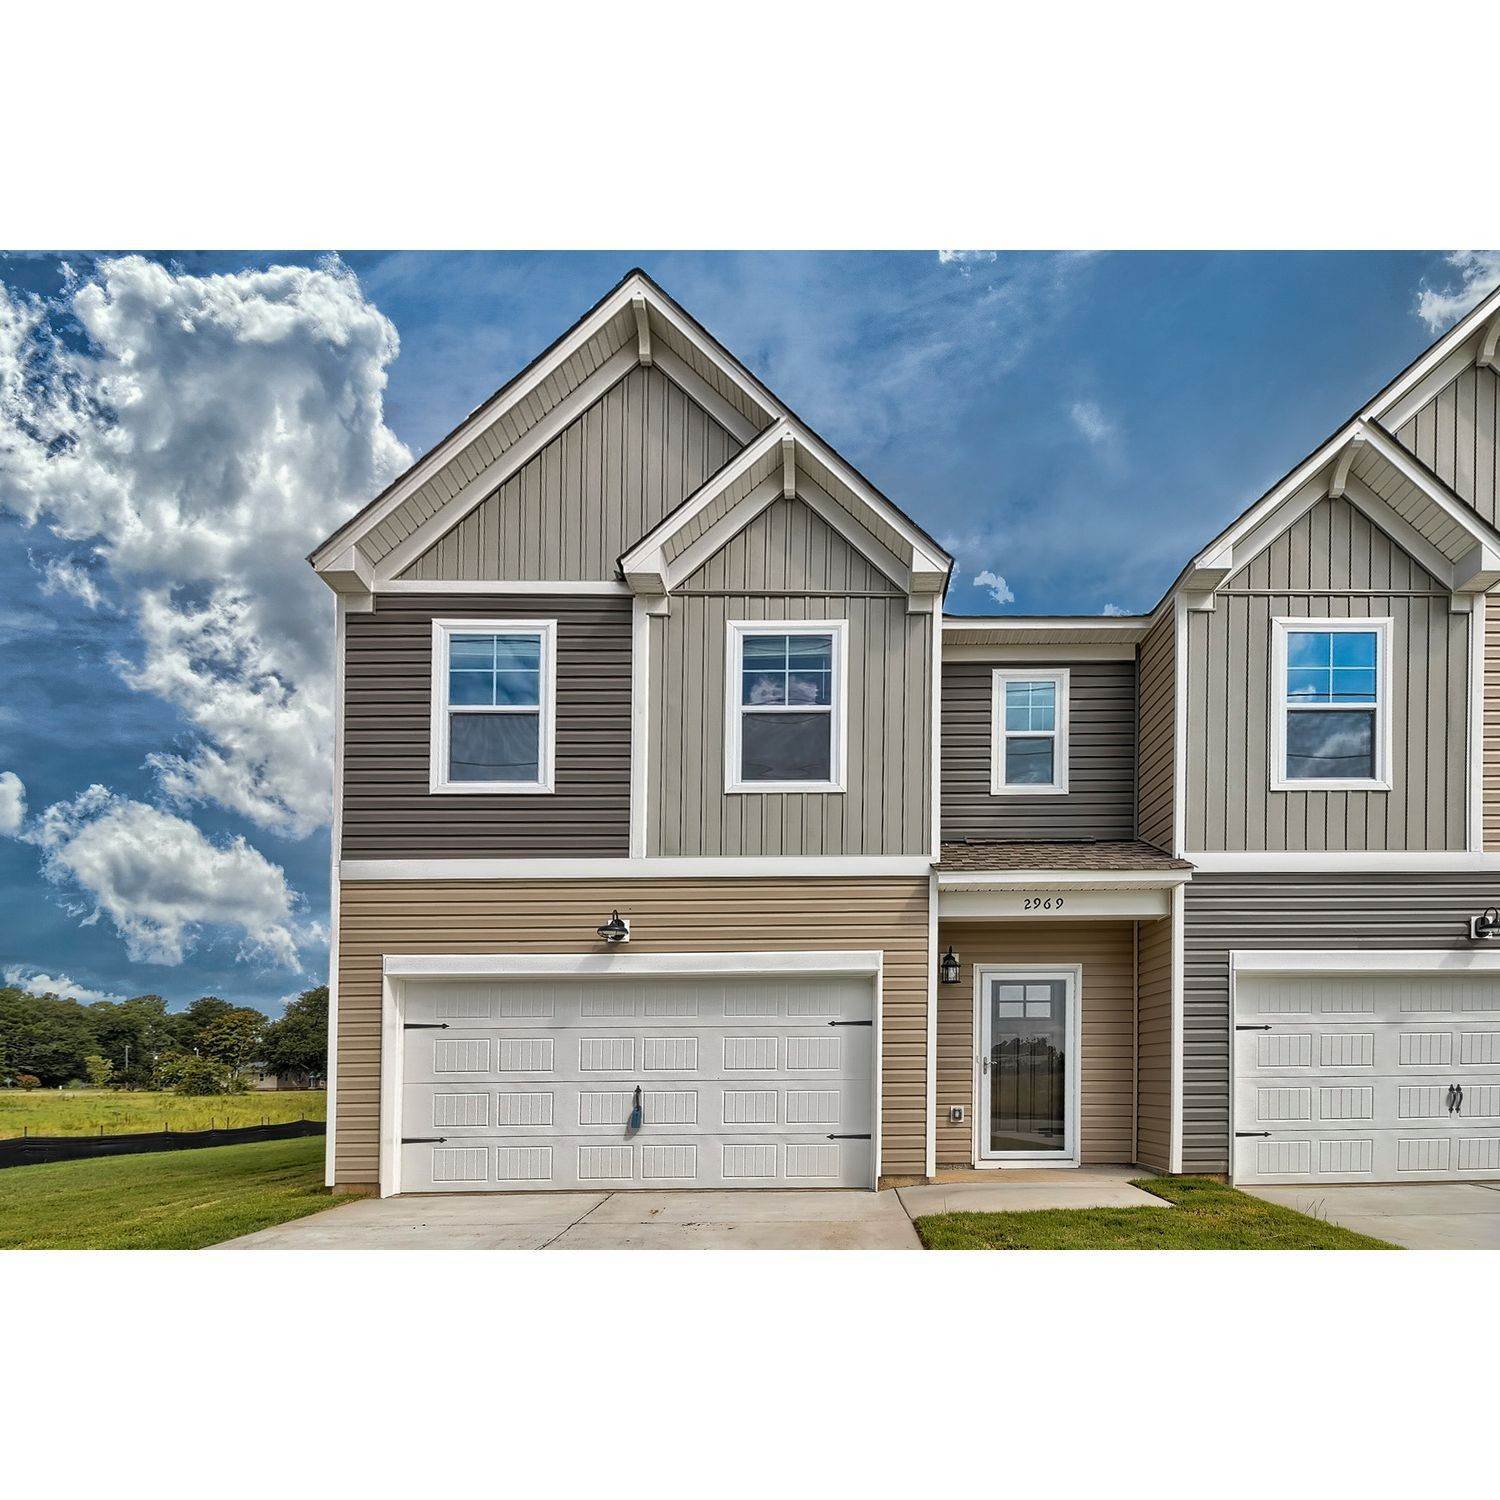 Townhomes at Pocalla Springs xây dựng tại 1788 Snead Drive, Sumter, SC 29154